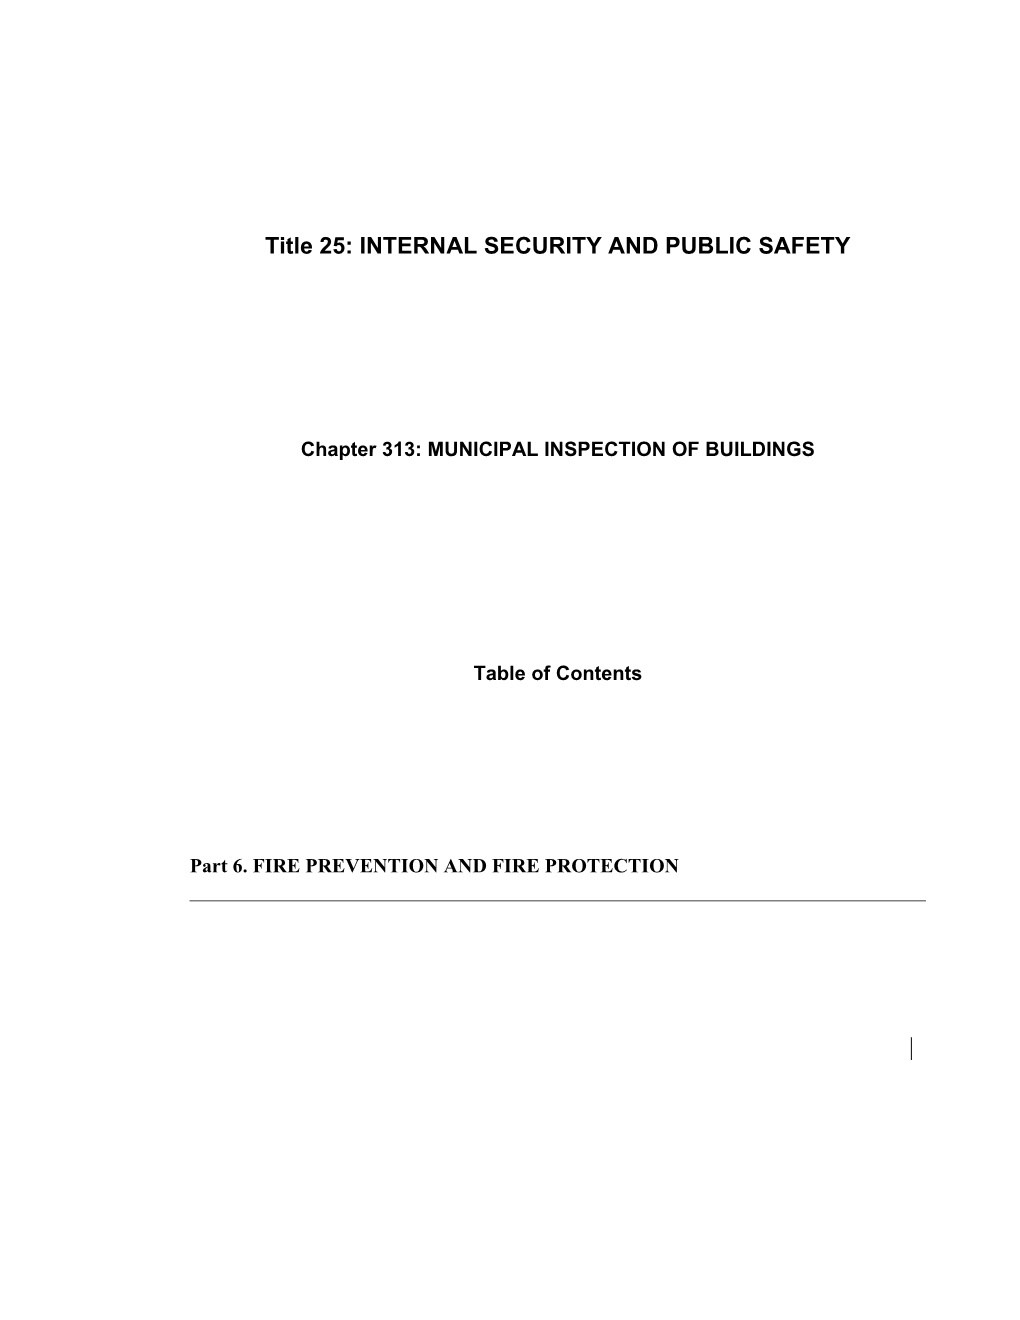 MRS Title 25, Chapter313: MUNICIPAL INSPECTION of BUILDINGS